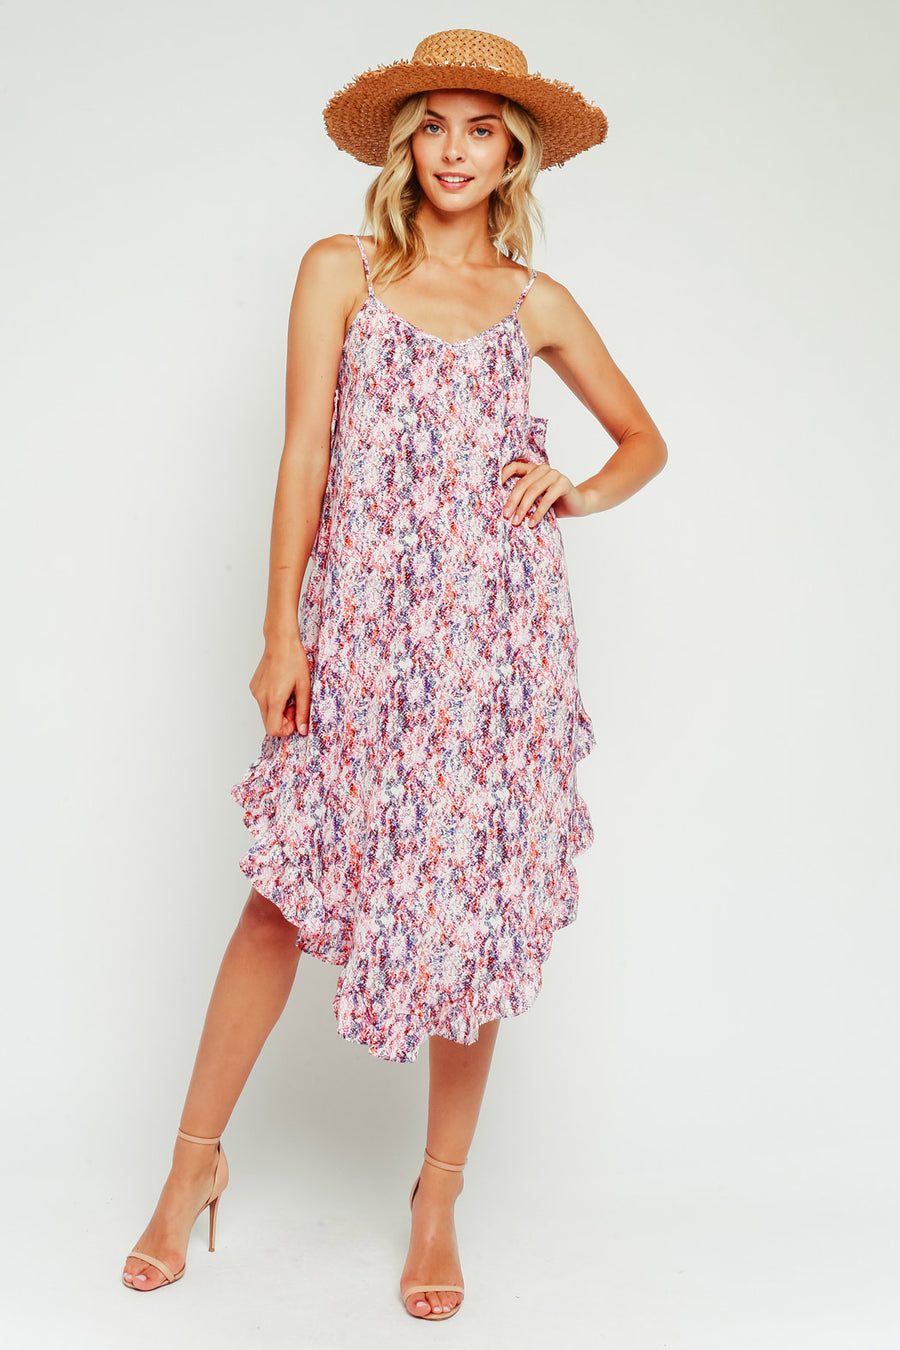 OLIVACEOUS The Sweetest Moments Midi Ruffle Dress